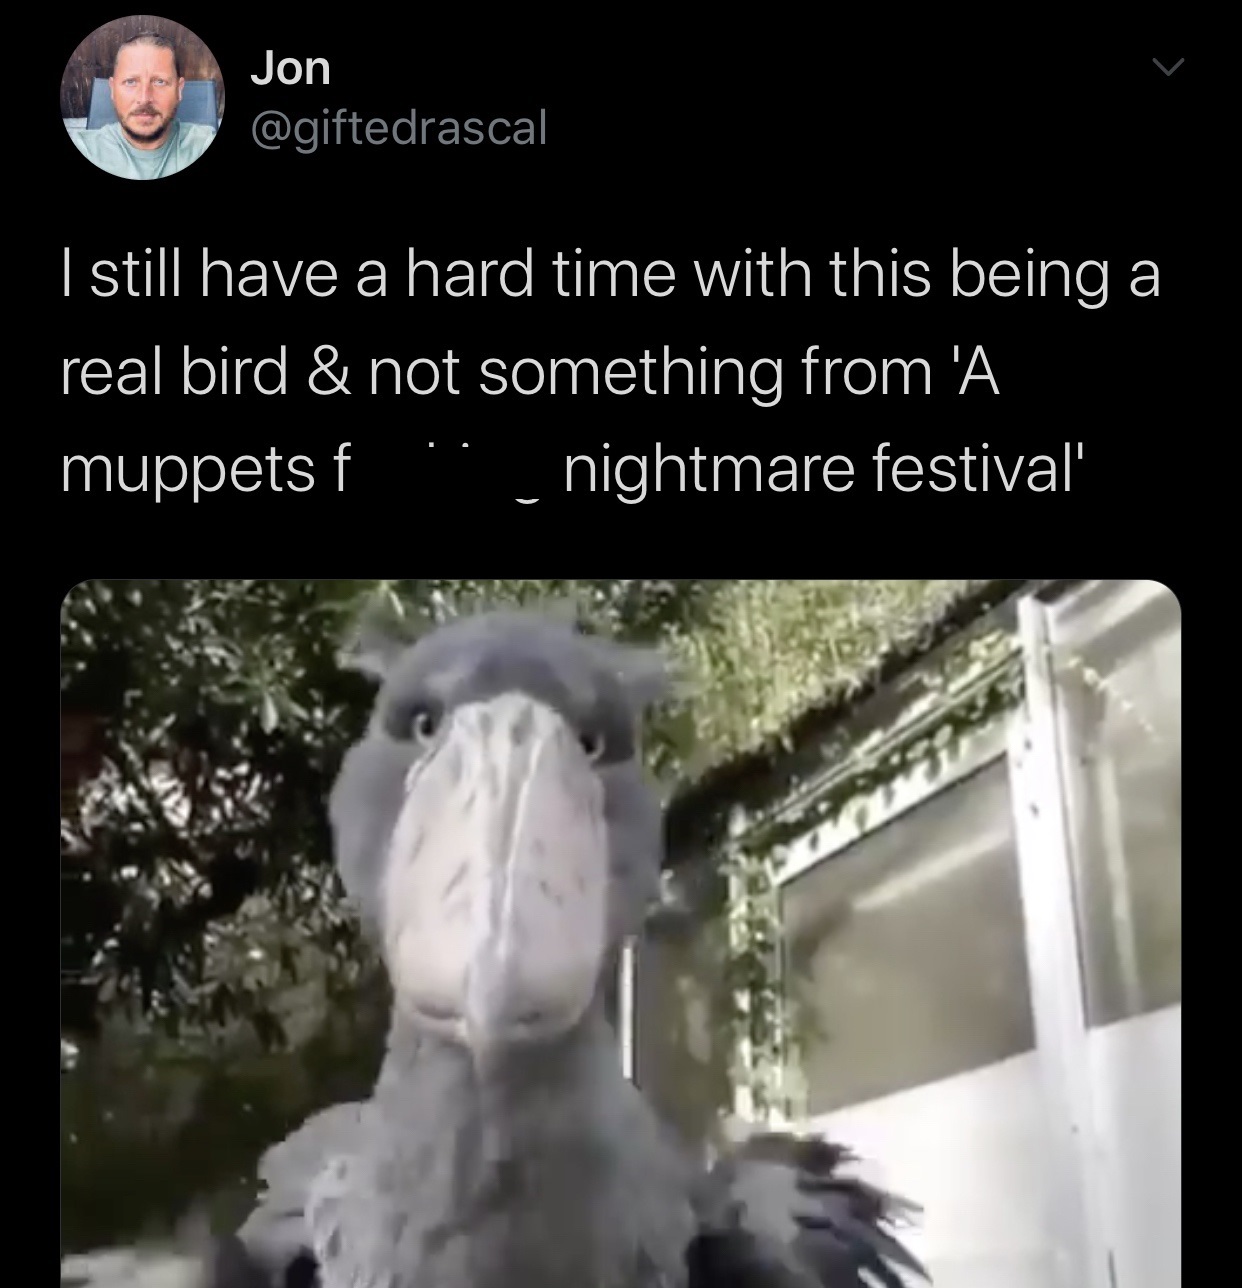 fauna - Jon I still have a hard time with this being a real bird & not something from 'A muppets f nightmare festival'